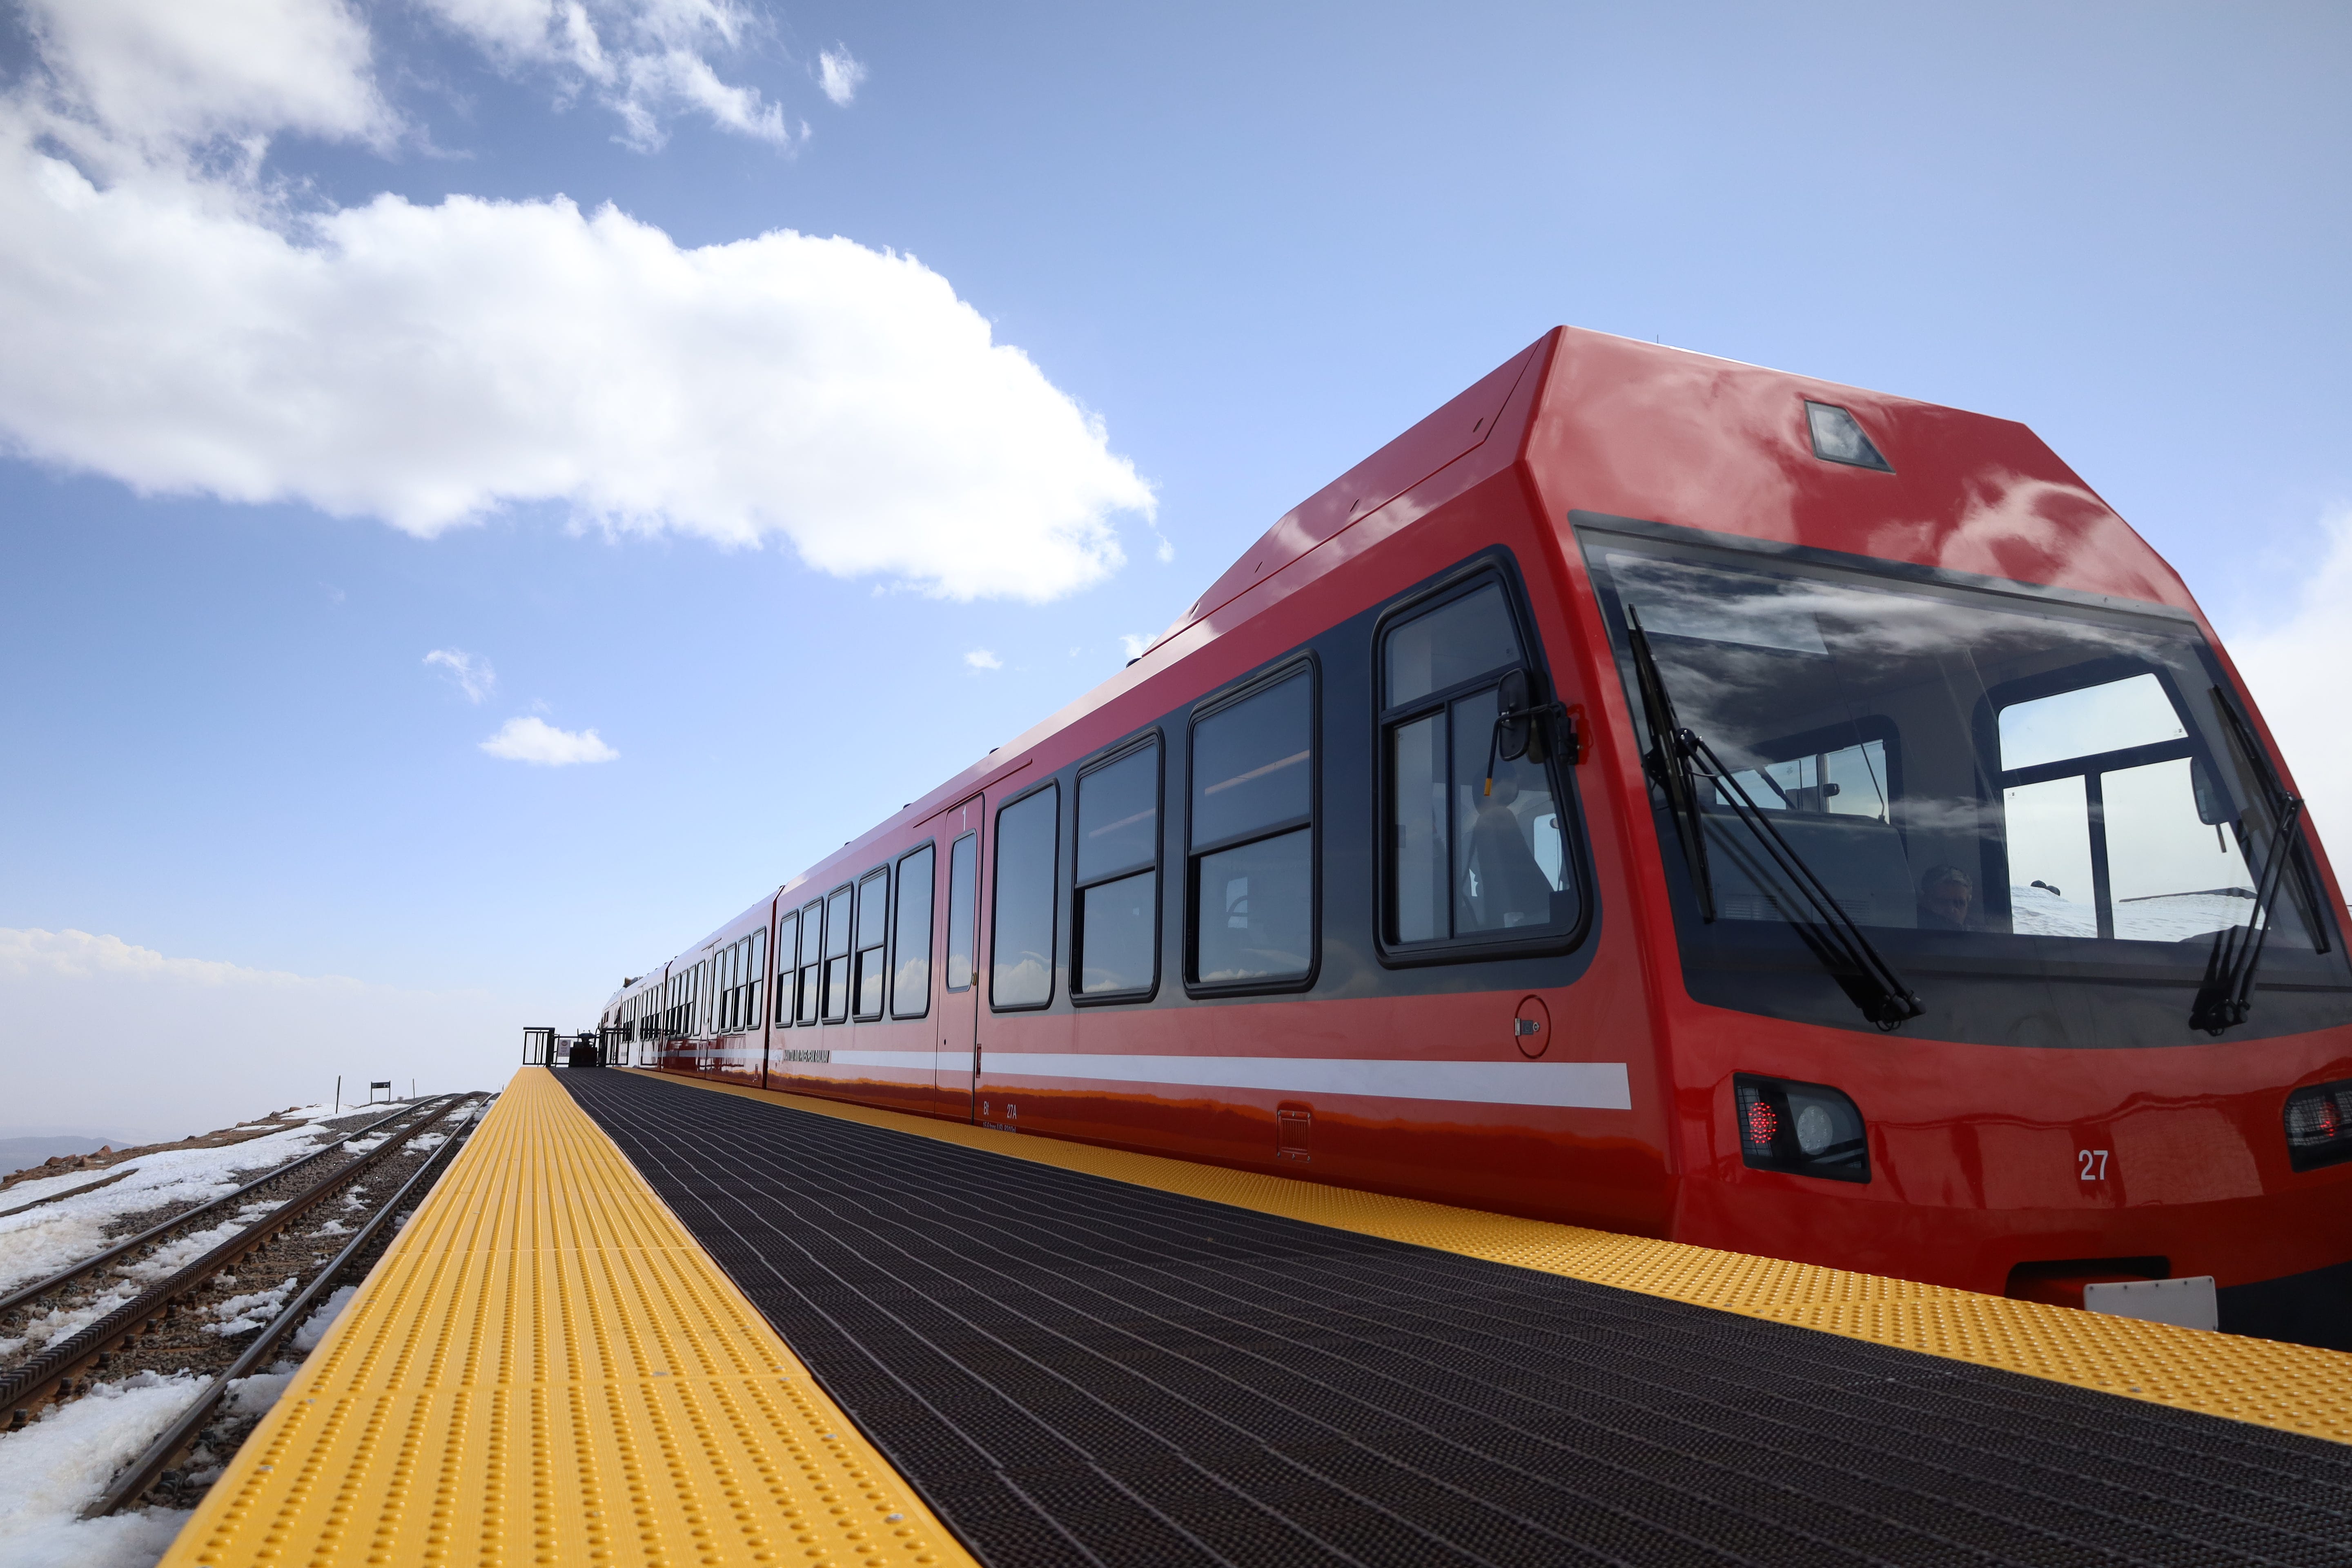 A bright red train at the platform, with a vibrant blue sky in the backdrop